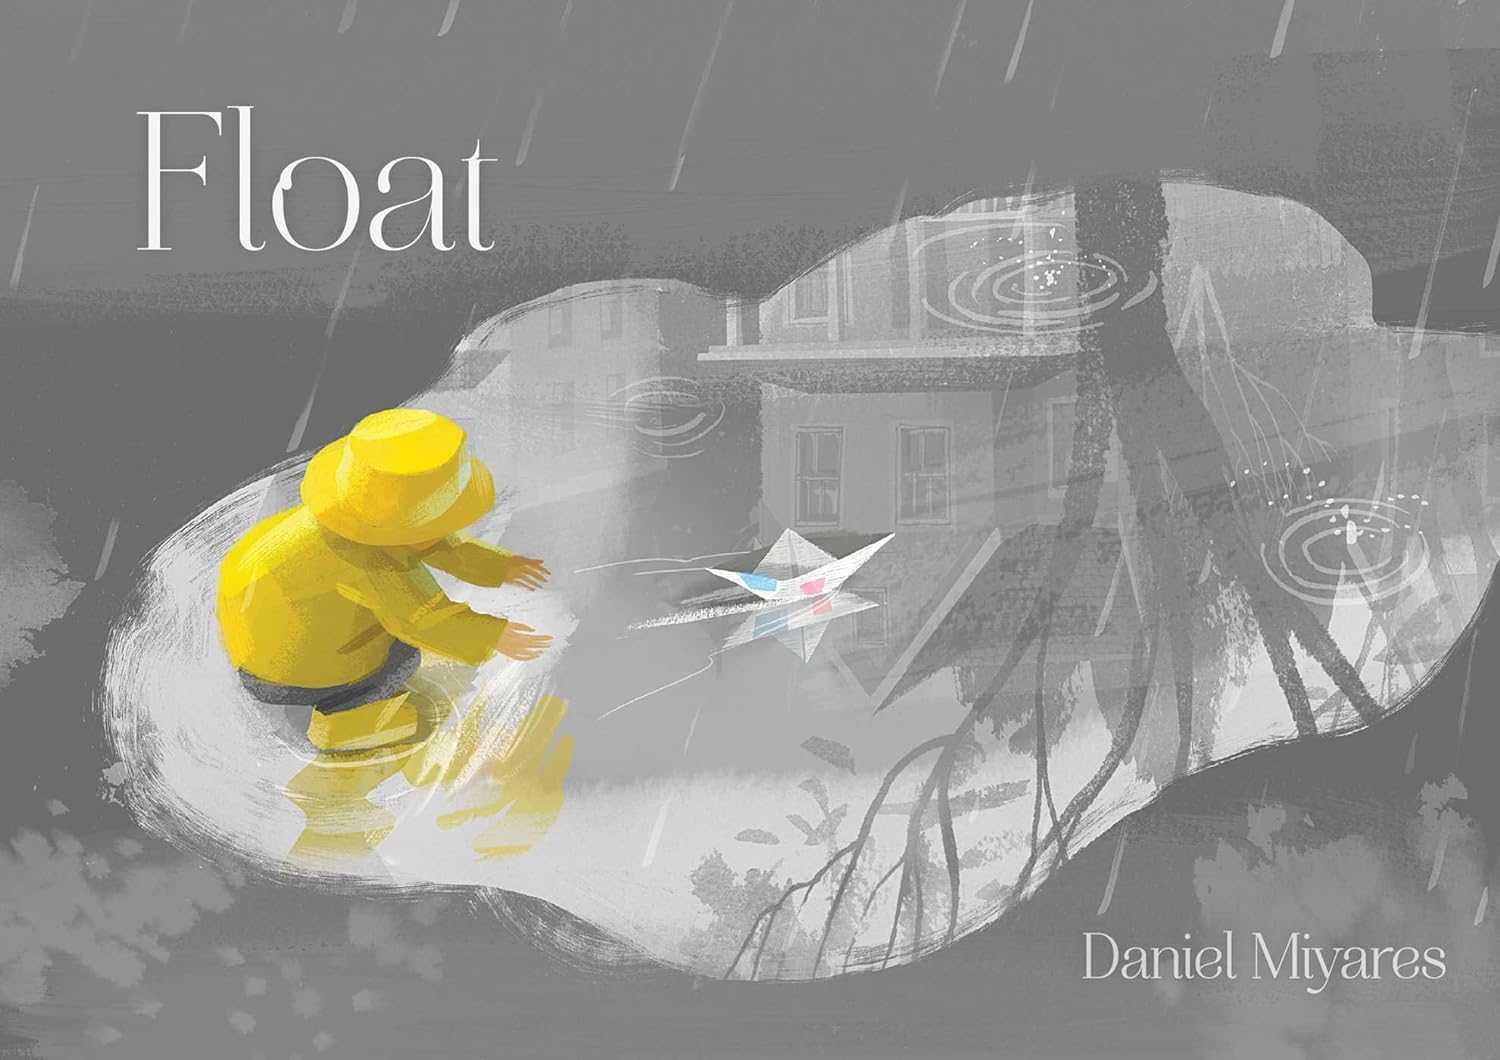 Cover Image for "Float"